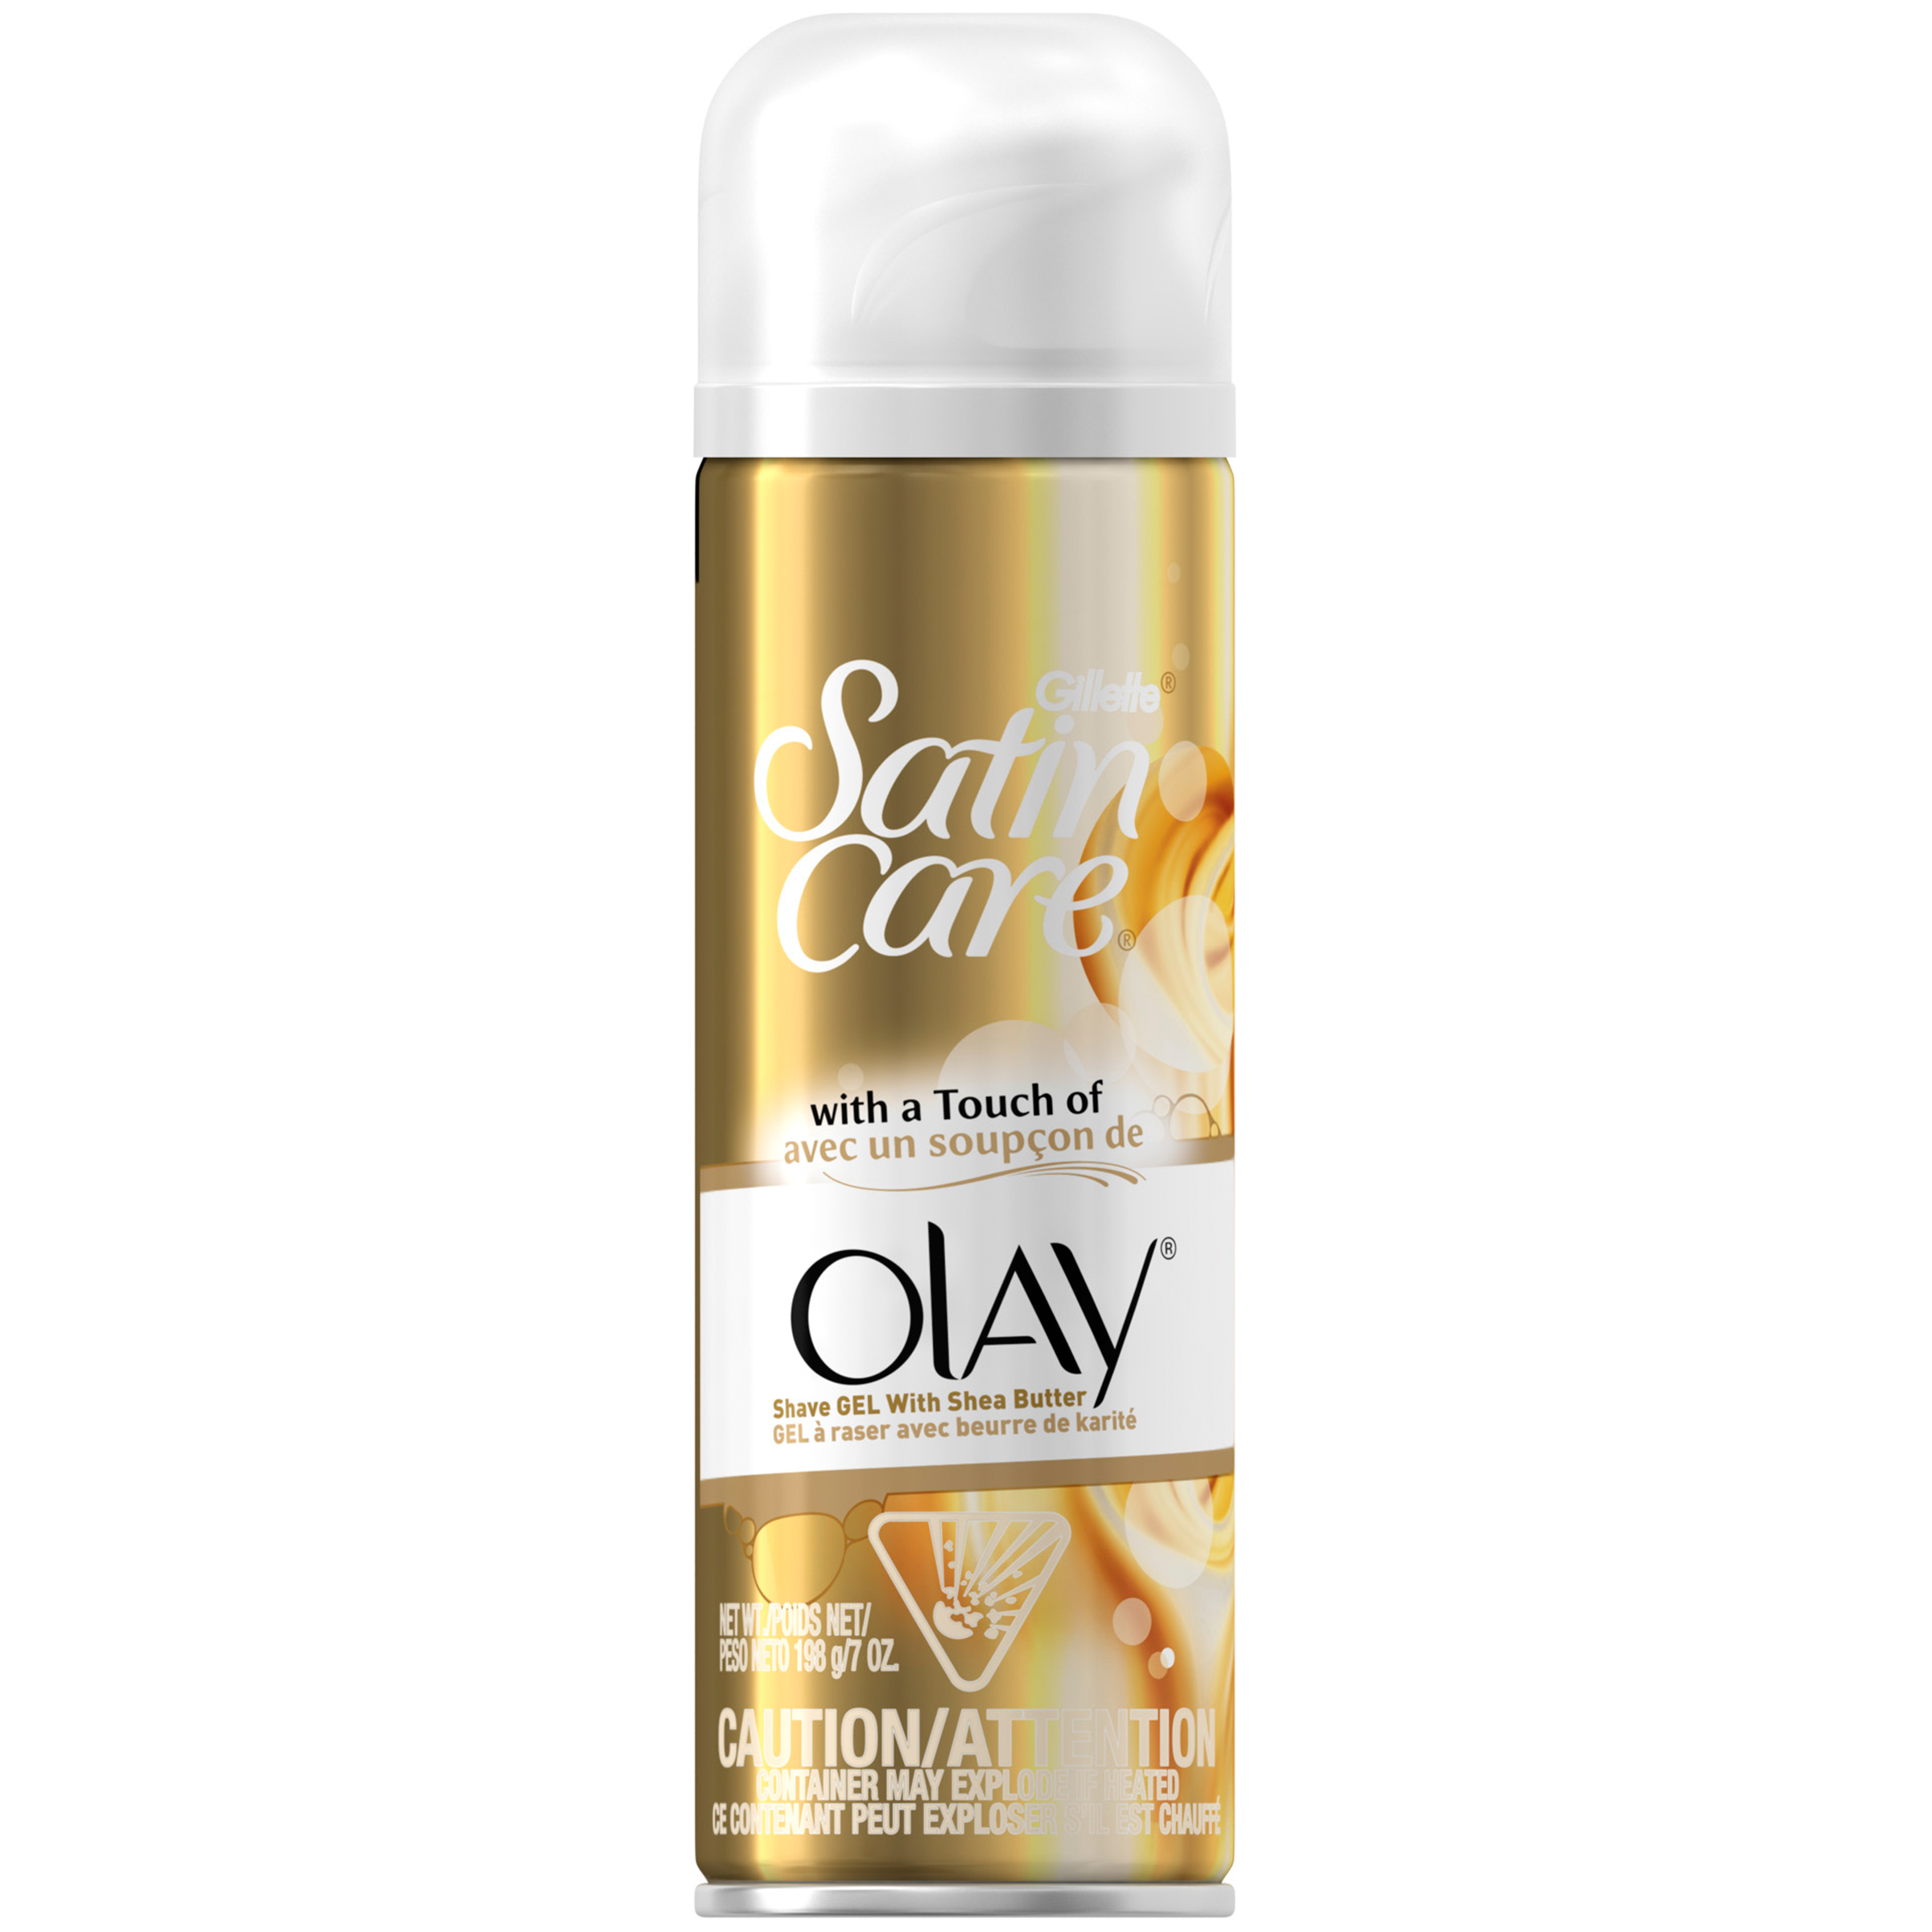 Gillette Satin Care With a Touch of Olay Shave Gel, with Shea Butter, 7 oz (198 g)